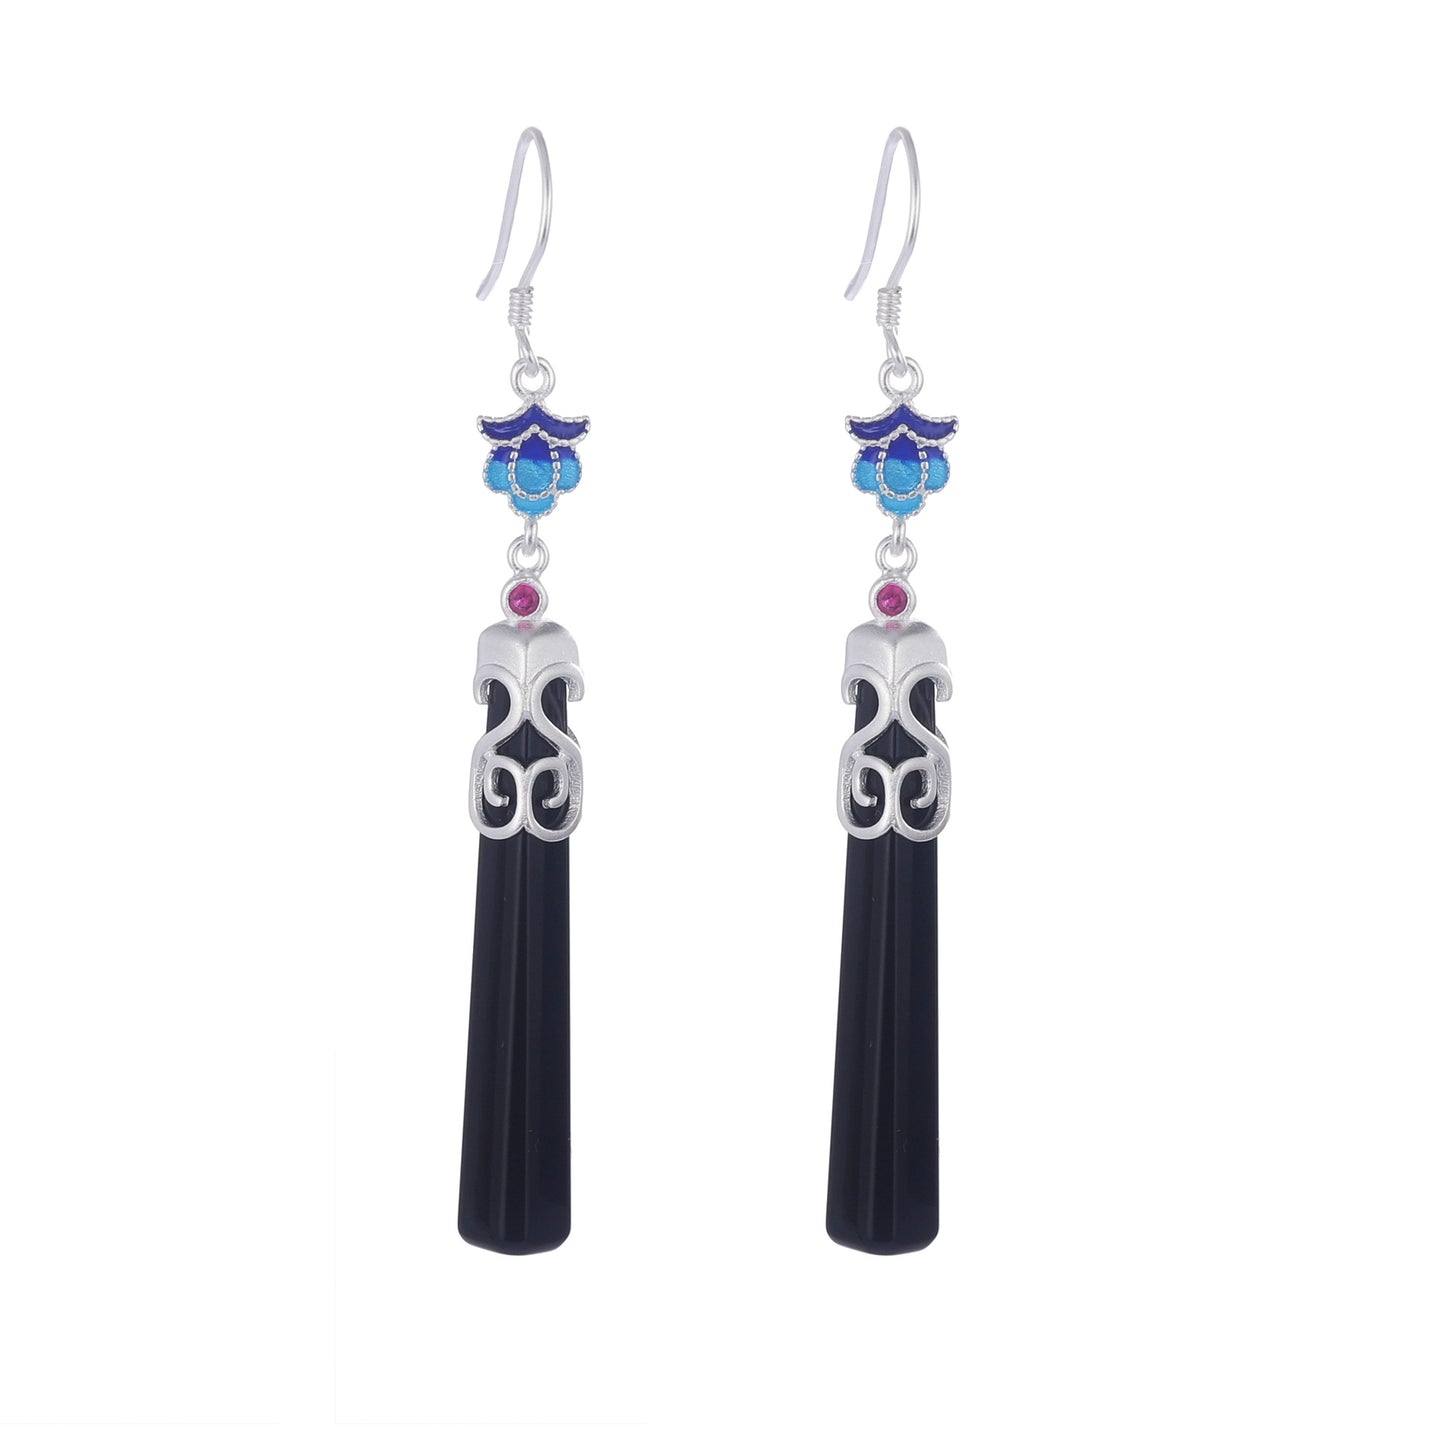 Women's Graceful And Fashionable Silver Black Agate Earrings